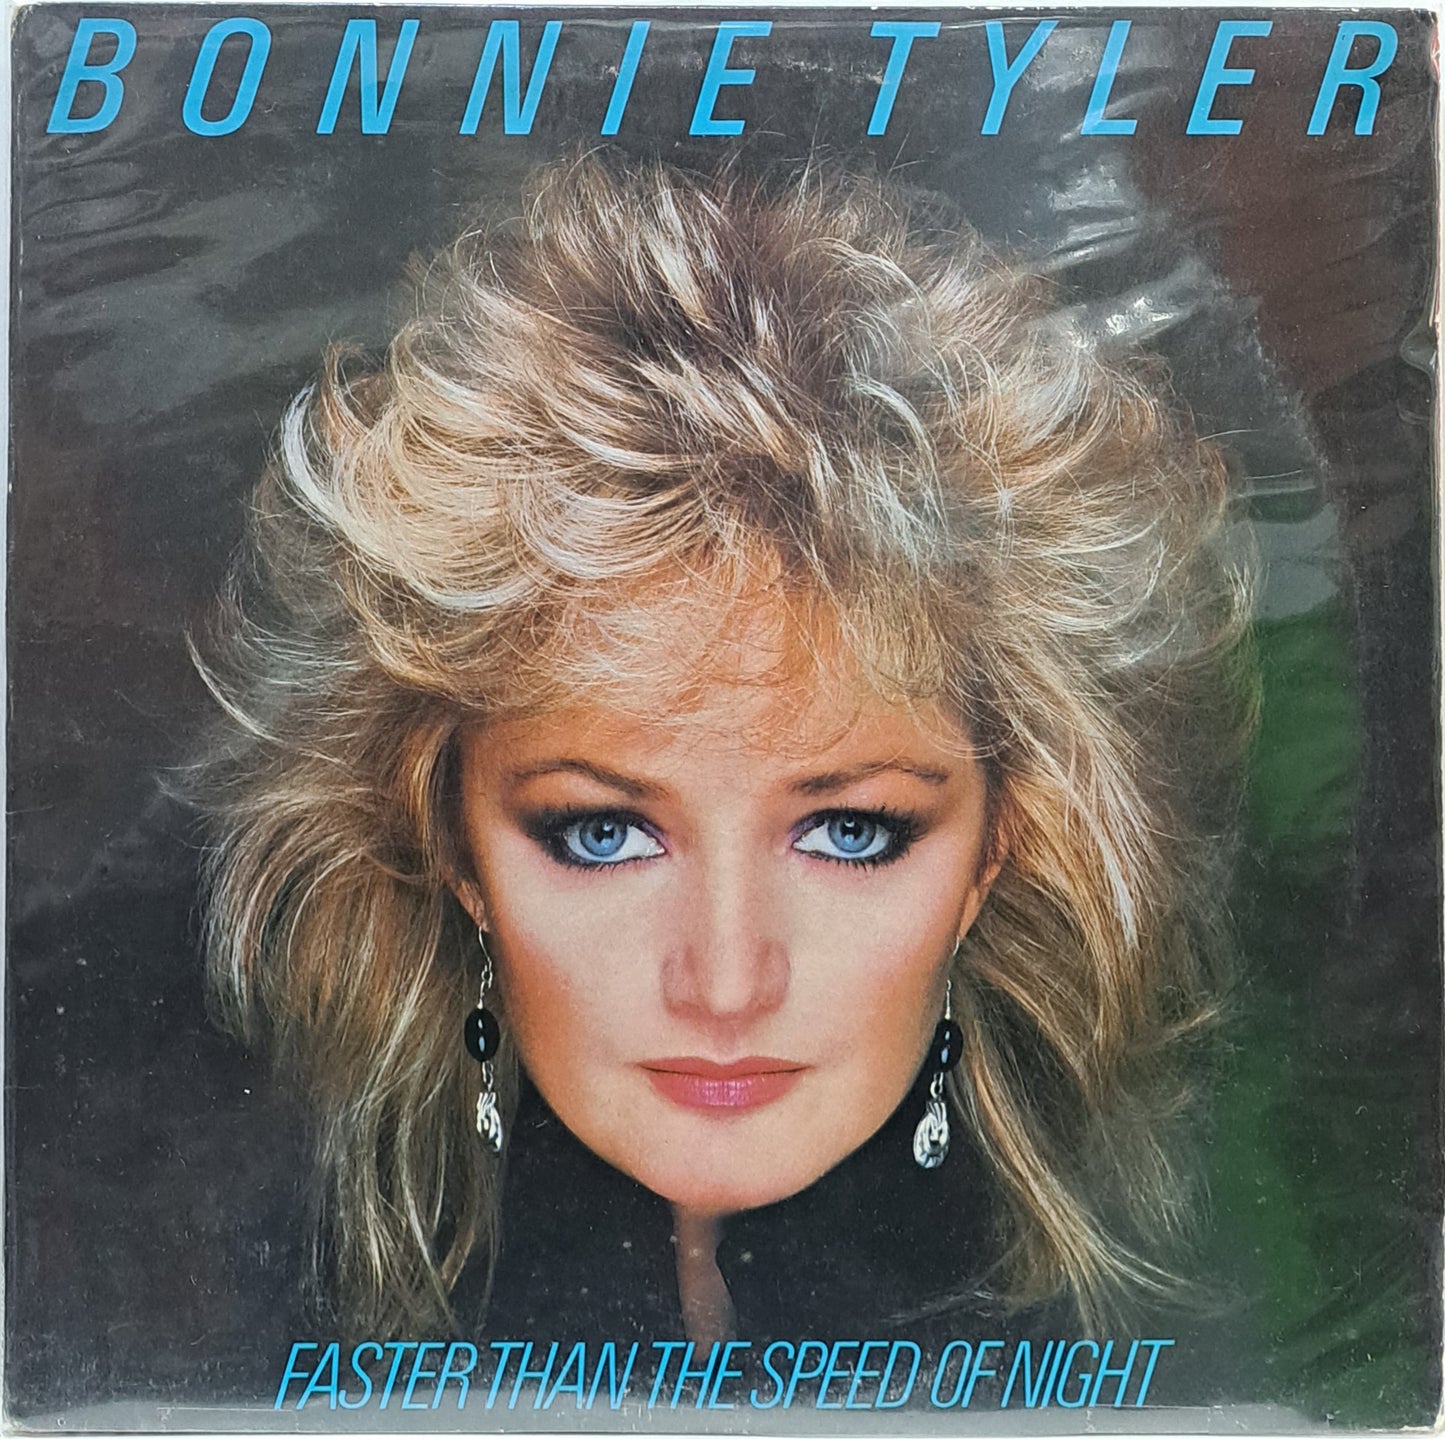 BONNIE TYLER - FASTER THAN THE SPEED OF NIGHT  LP